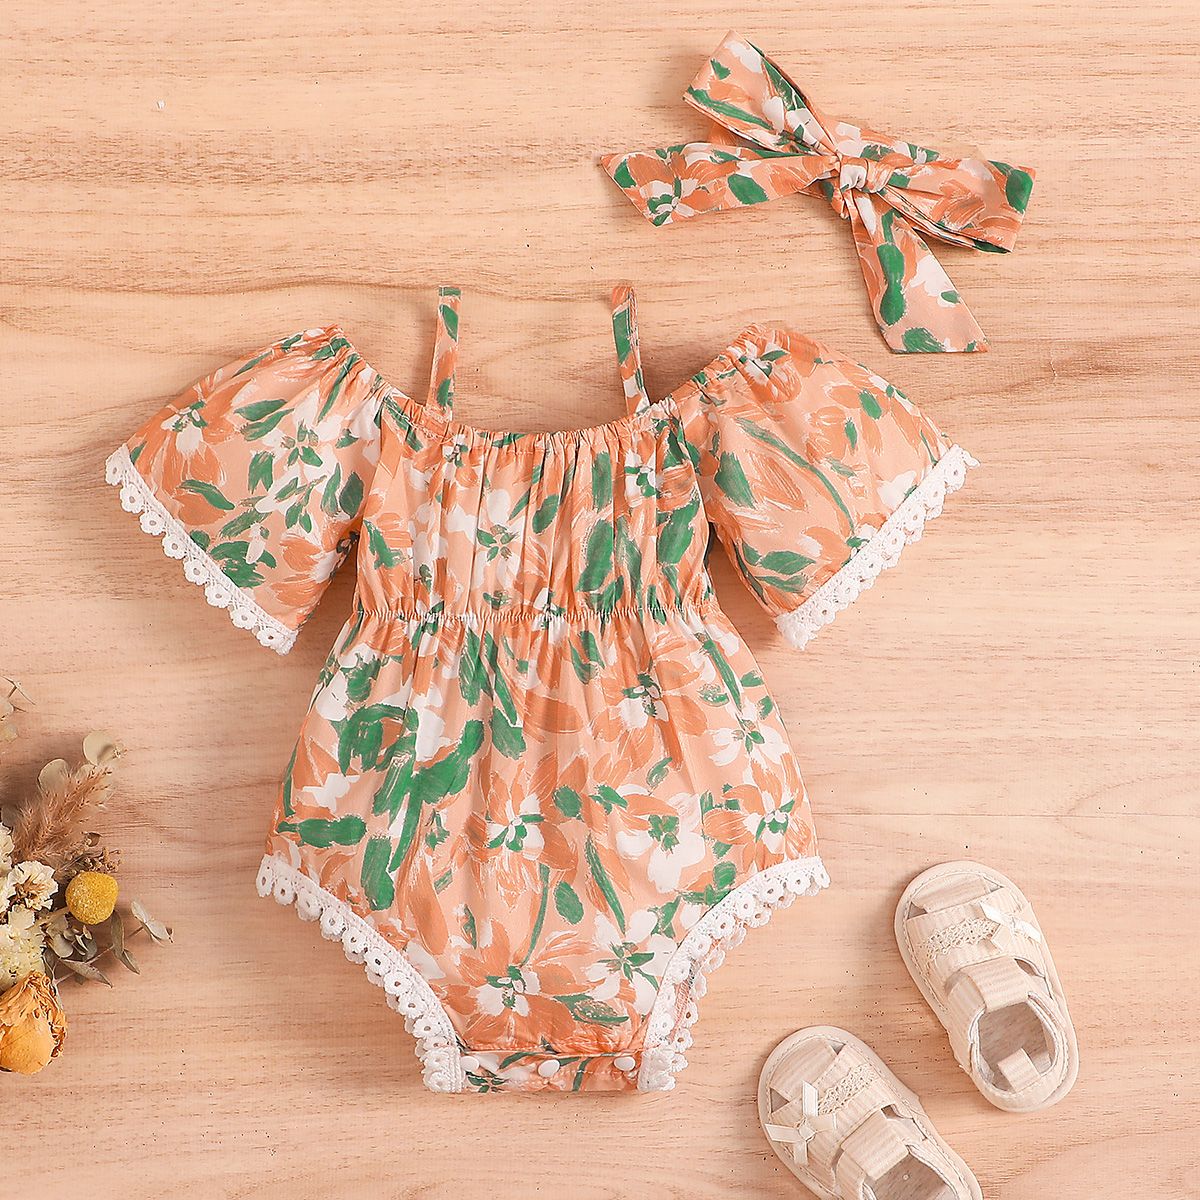 2pcs Baby Girl 100% Cotton Allover Floral Print Lace Short-sleeve Slip Bodysuit and Headband Set